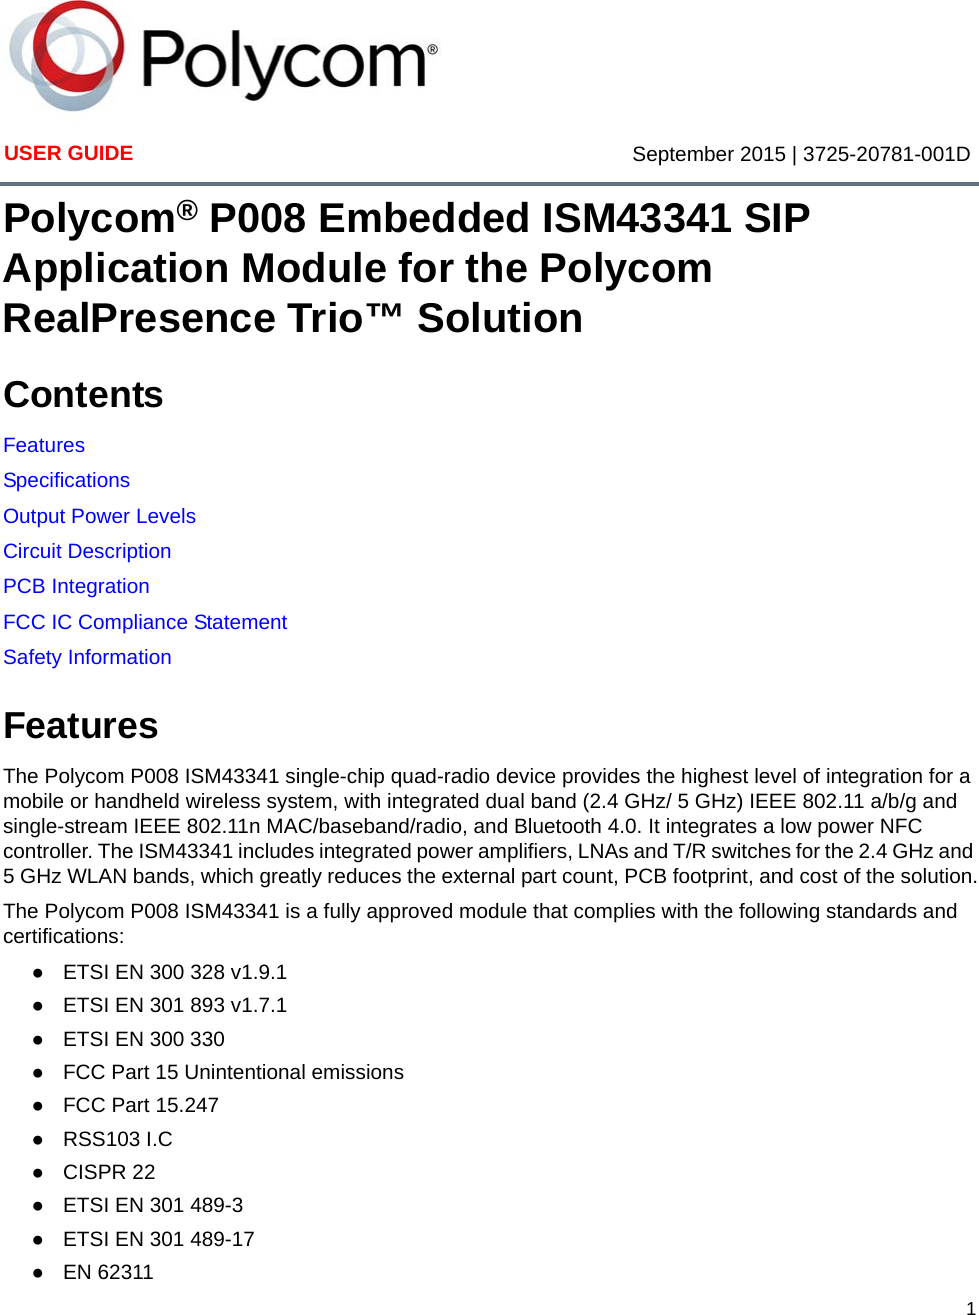 1USER GUIDE September 2015 | 3725-20781-001DPolycom® P008 Embedded ISM43341 SIP Application Module for the Polycom RealPresence Trio™ SolutionContentsFeaturesSpecificationsOutput Power LevelsCircuit DescriptionPCB IntegrationFCC IC Compliance StatementSafety InformationFeaturesThe Polycom P008 ISM43341 single-chip quad-radio device provides the highest level of integration for a mobile or handheld wireless system, with integrated dual band (2.4 GHz/ 5 GHz) IEEE 802.11 a/b/g and single-stream IEEE 802.11n MAC/baseband/radio, and Bluetooth 4.0. It integrates a low power NFC controller. The ISM43341 includes integrated power amplifiers, LNAs and T/R switches for the 2.4 GHz and 5 GHz WLAN bands, which greatly reduces the external part count, PCB footprint, and cost of the solution.The Polycom P008 ISM43341 is a fully approved module that complies with the following standards and certifications: ●ETSI EN 300 328 v1.9.1●ETSI EN 301 893 v1.7.1●ETSI EN 300 330 ●FCC Part 15 Unintentional emissions●FCC Part 15.247 ●RSS103 I.C●CISPR 22●ETSI EN 301 489-3●ETSI EN 301 489-17●EN 62311